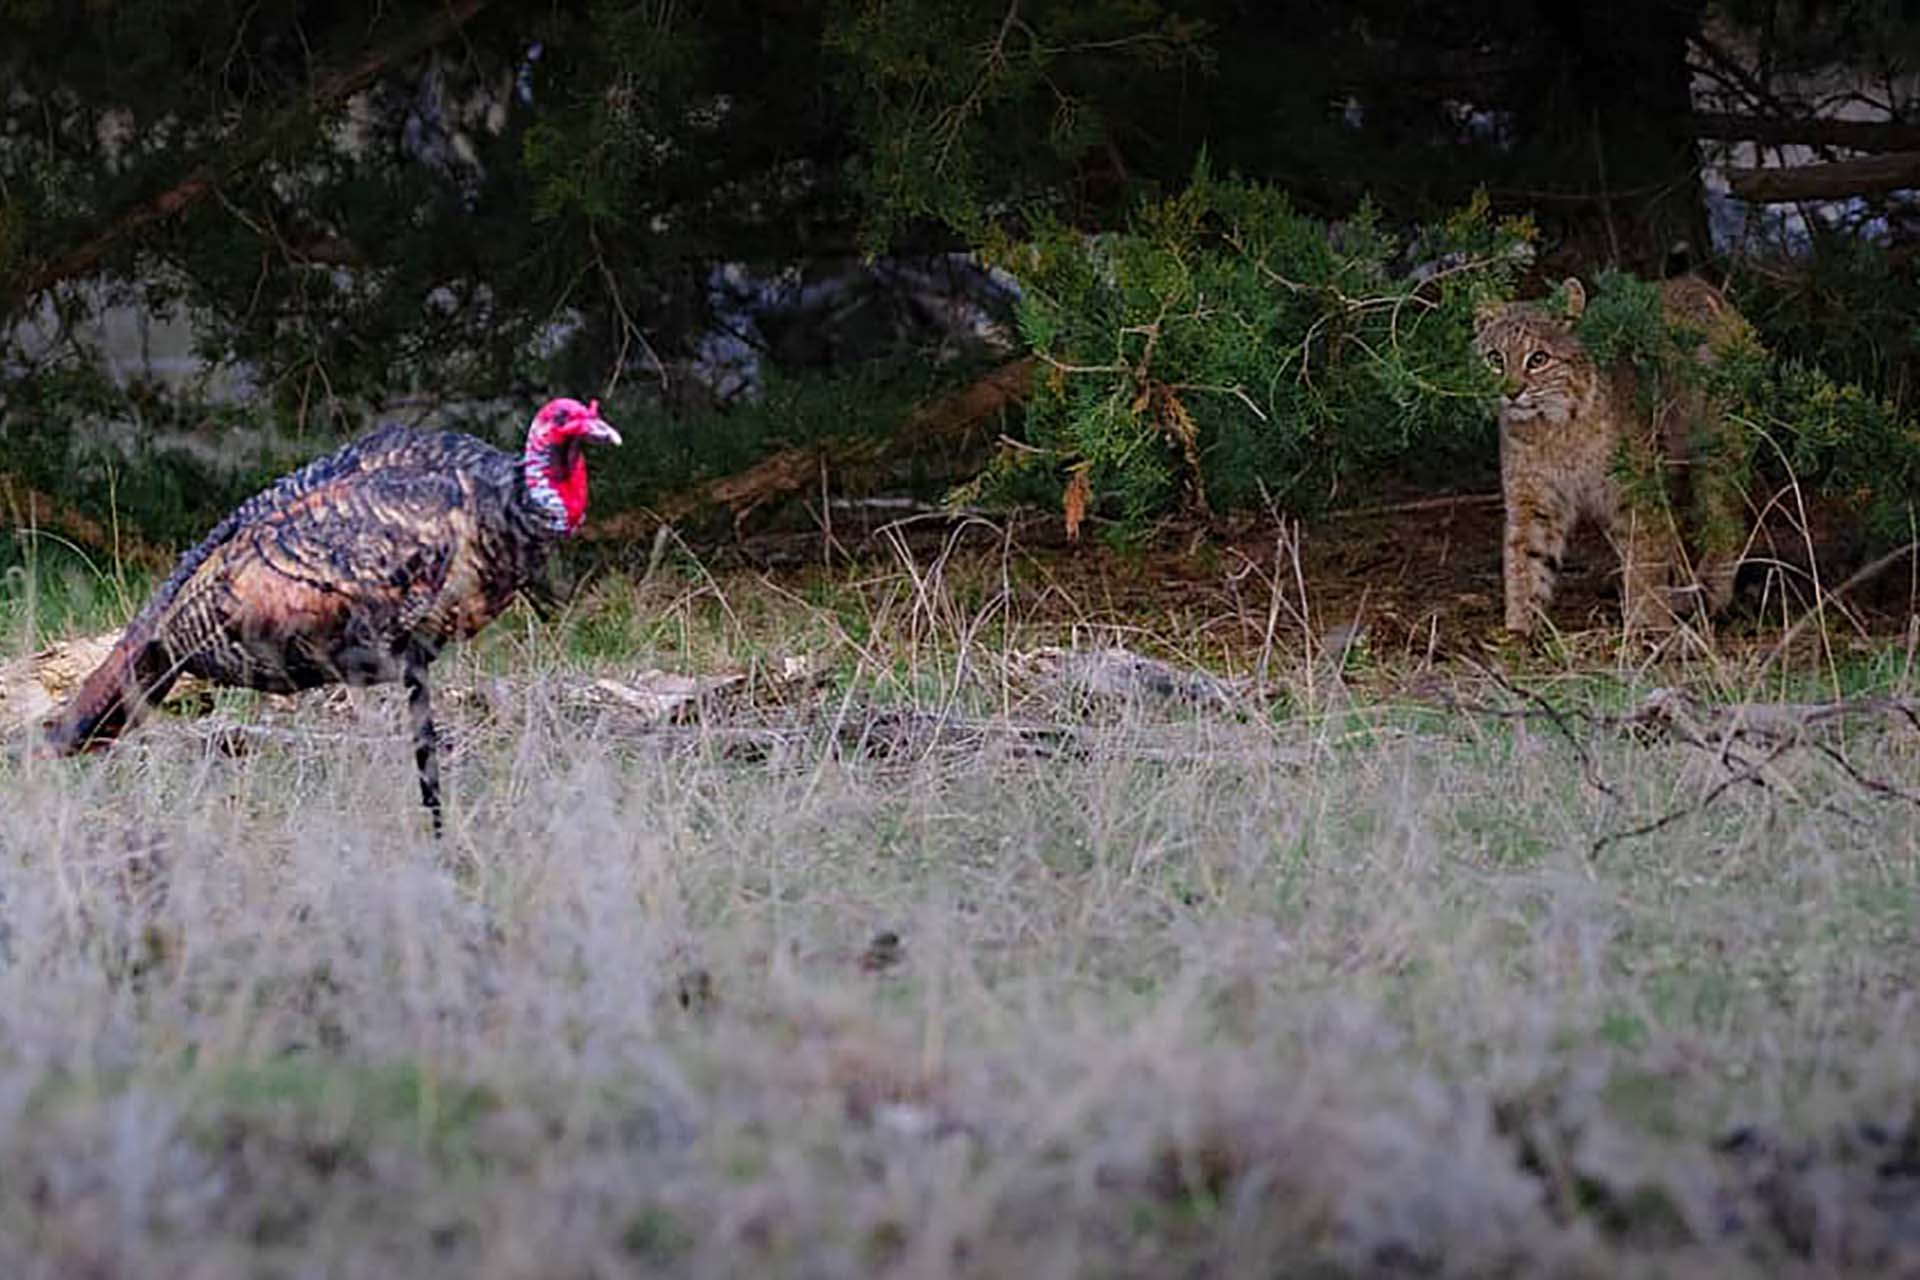 If Jake Purrfect's realism can fool one of the most wary creatures on earth, you can bet it'll fool a hot tom turkey.